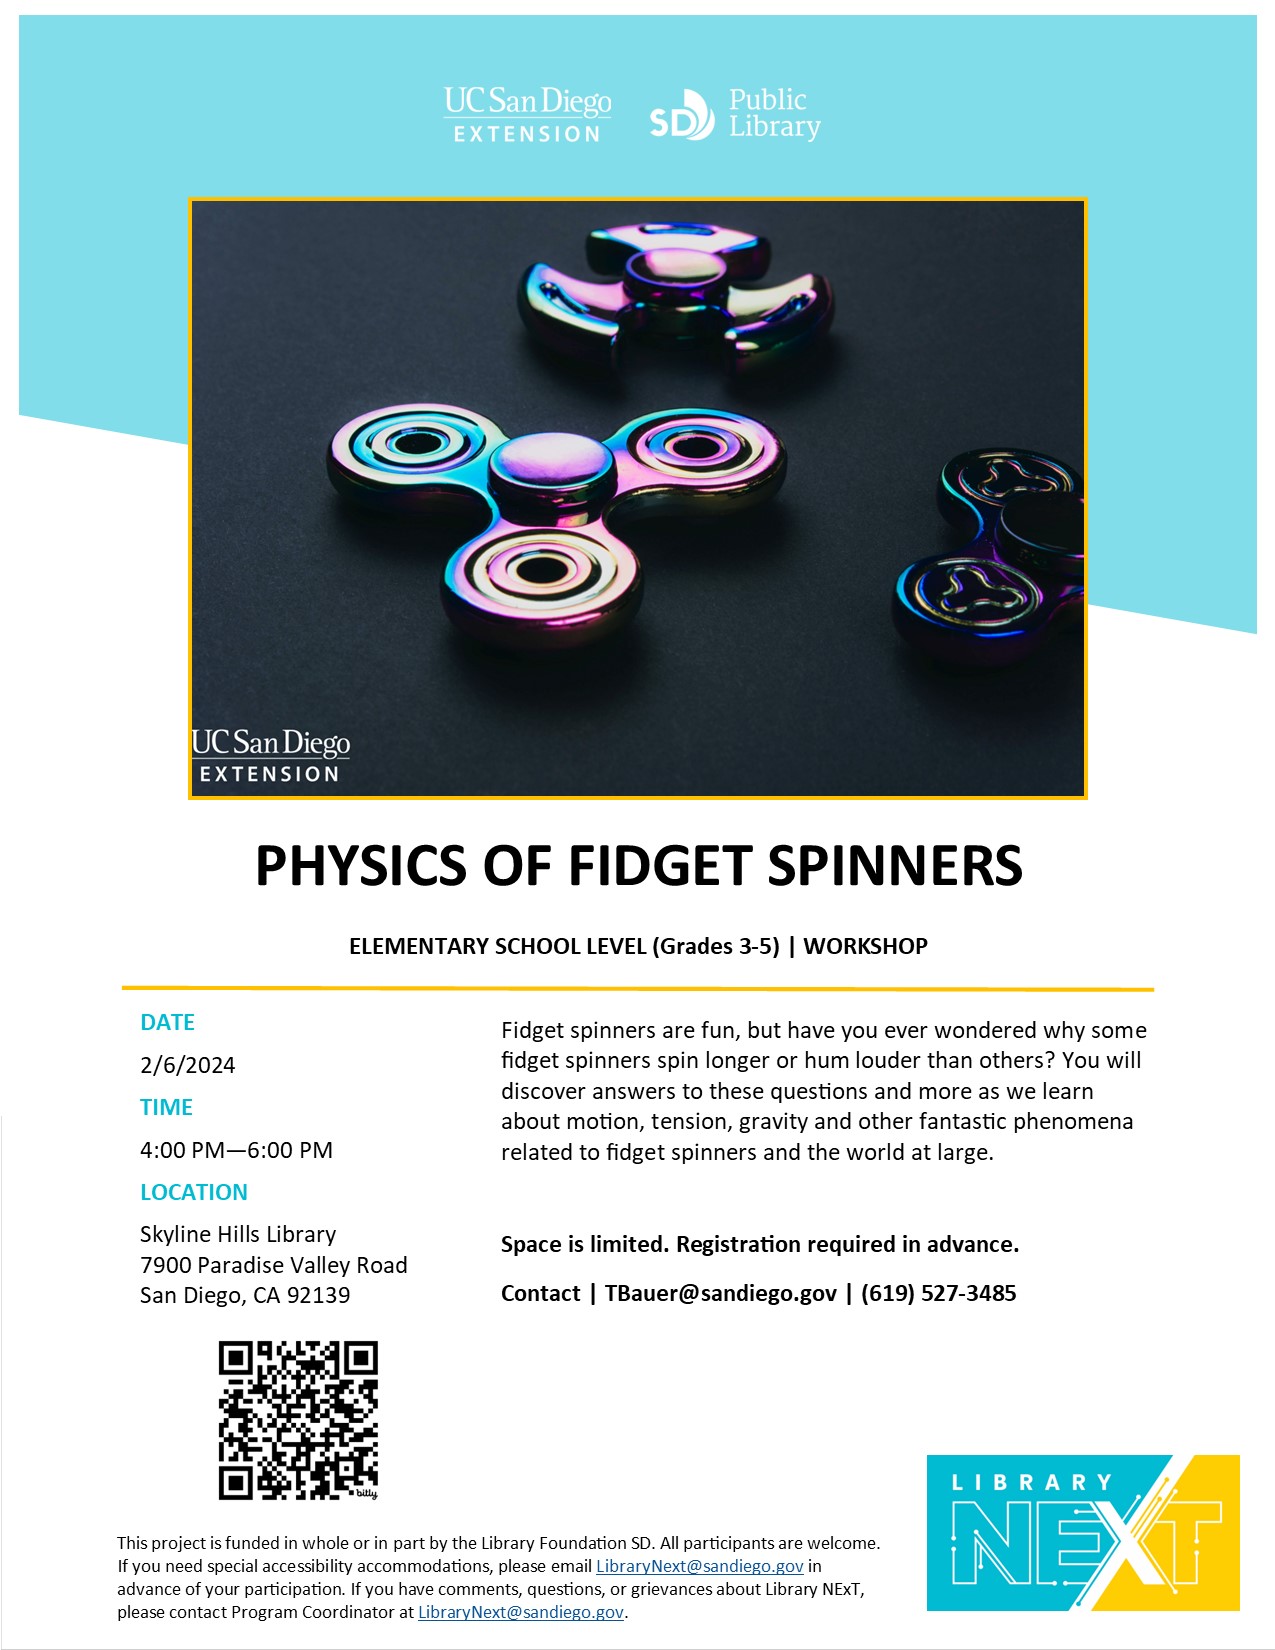 Physics of Fidget Spinners